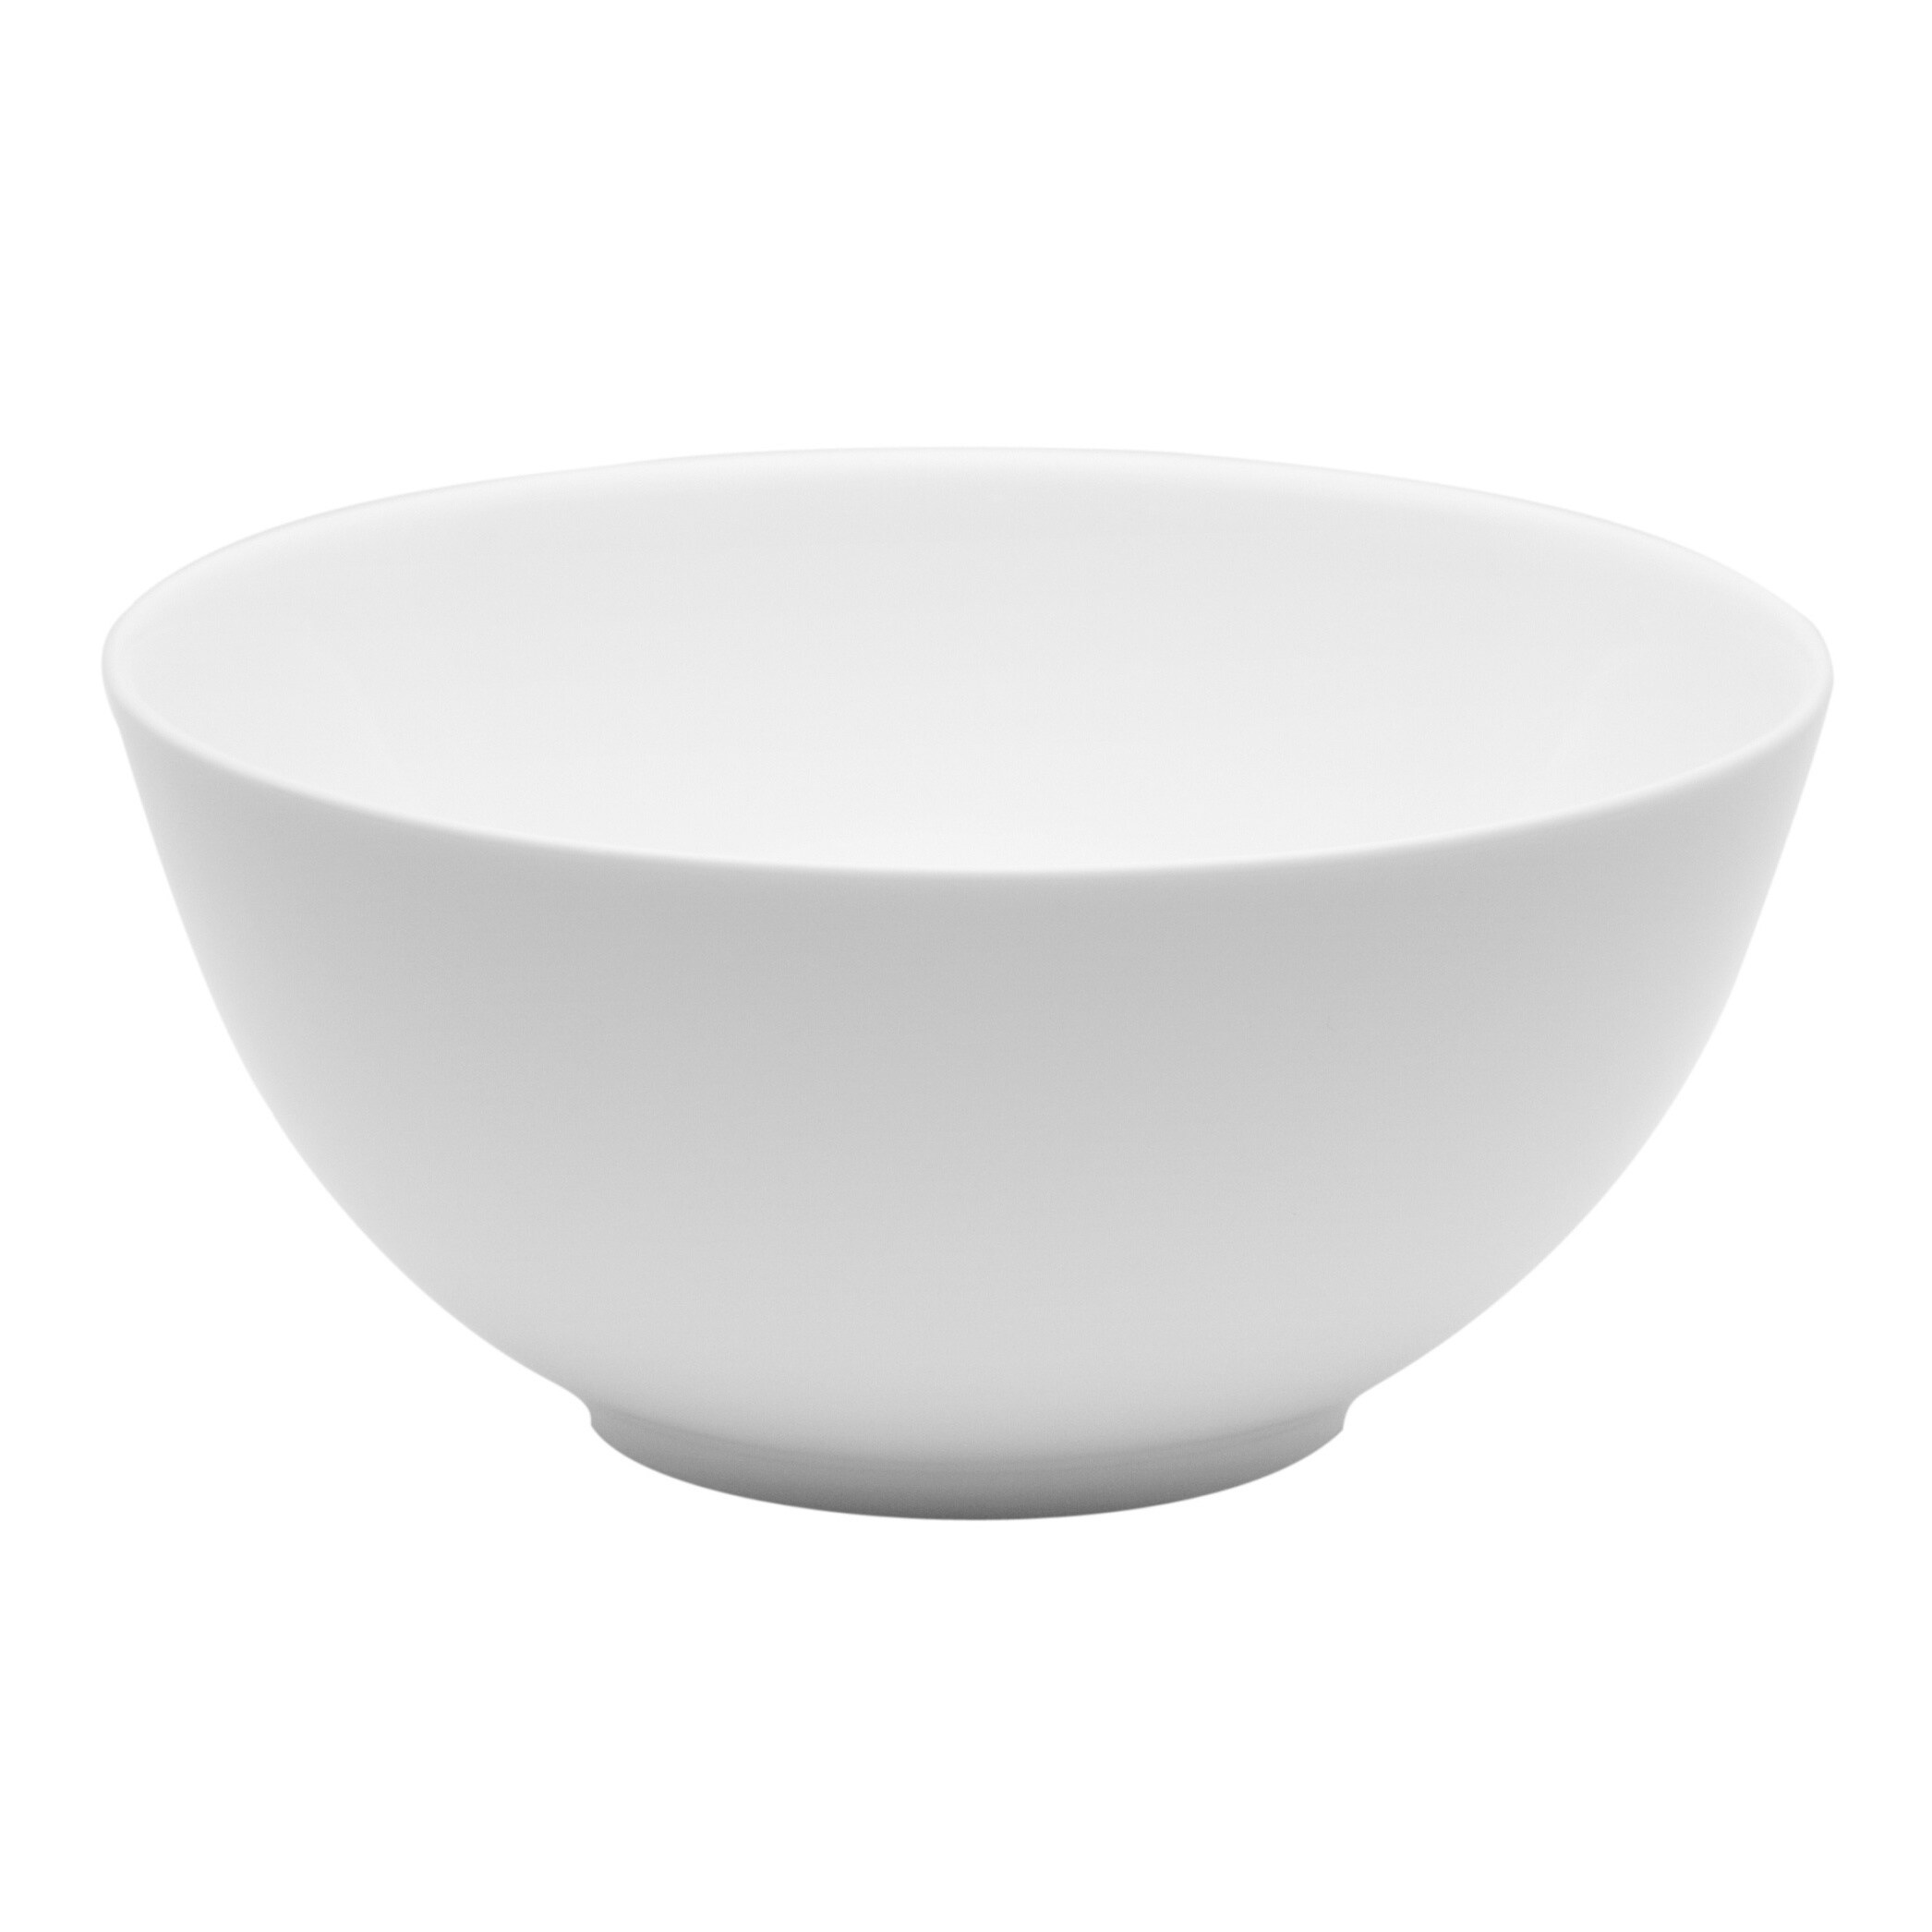 https://ak1.ostkcdn.com/images/products/10296783/Every-Time-White-Tall-Cereal-Bowl-Set-of-6-91a86e86-e1c6-4a00-b307-d1de2091c550.jpg